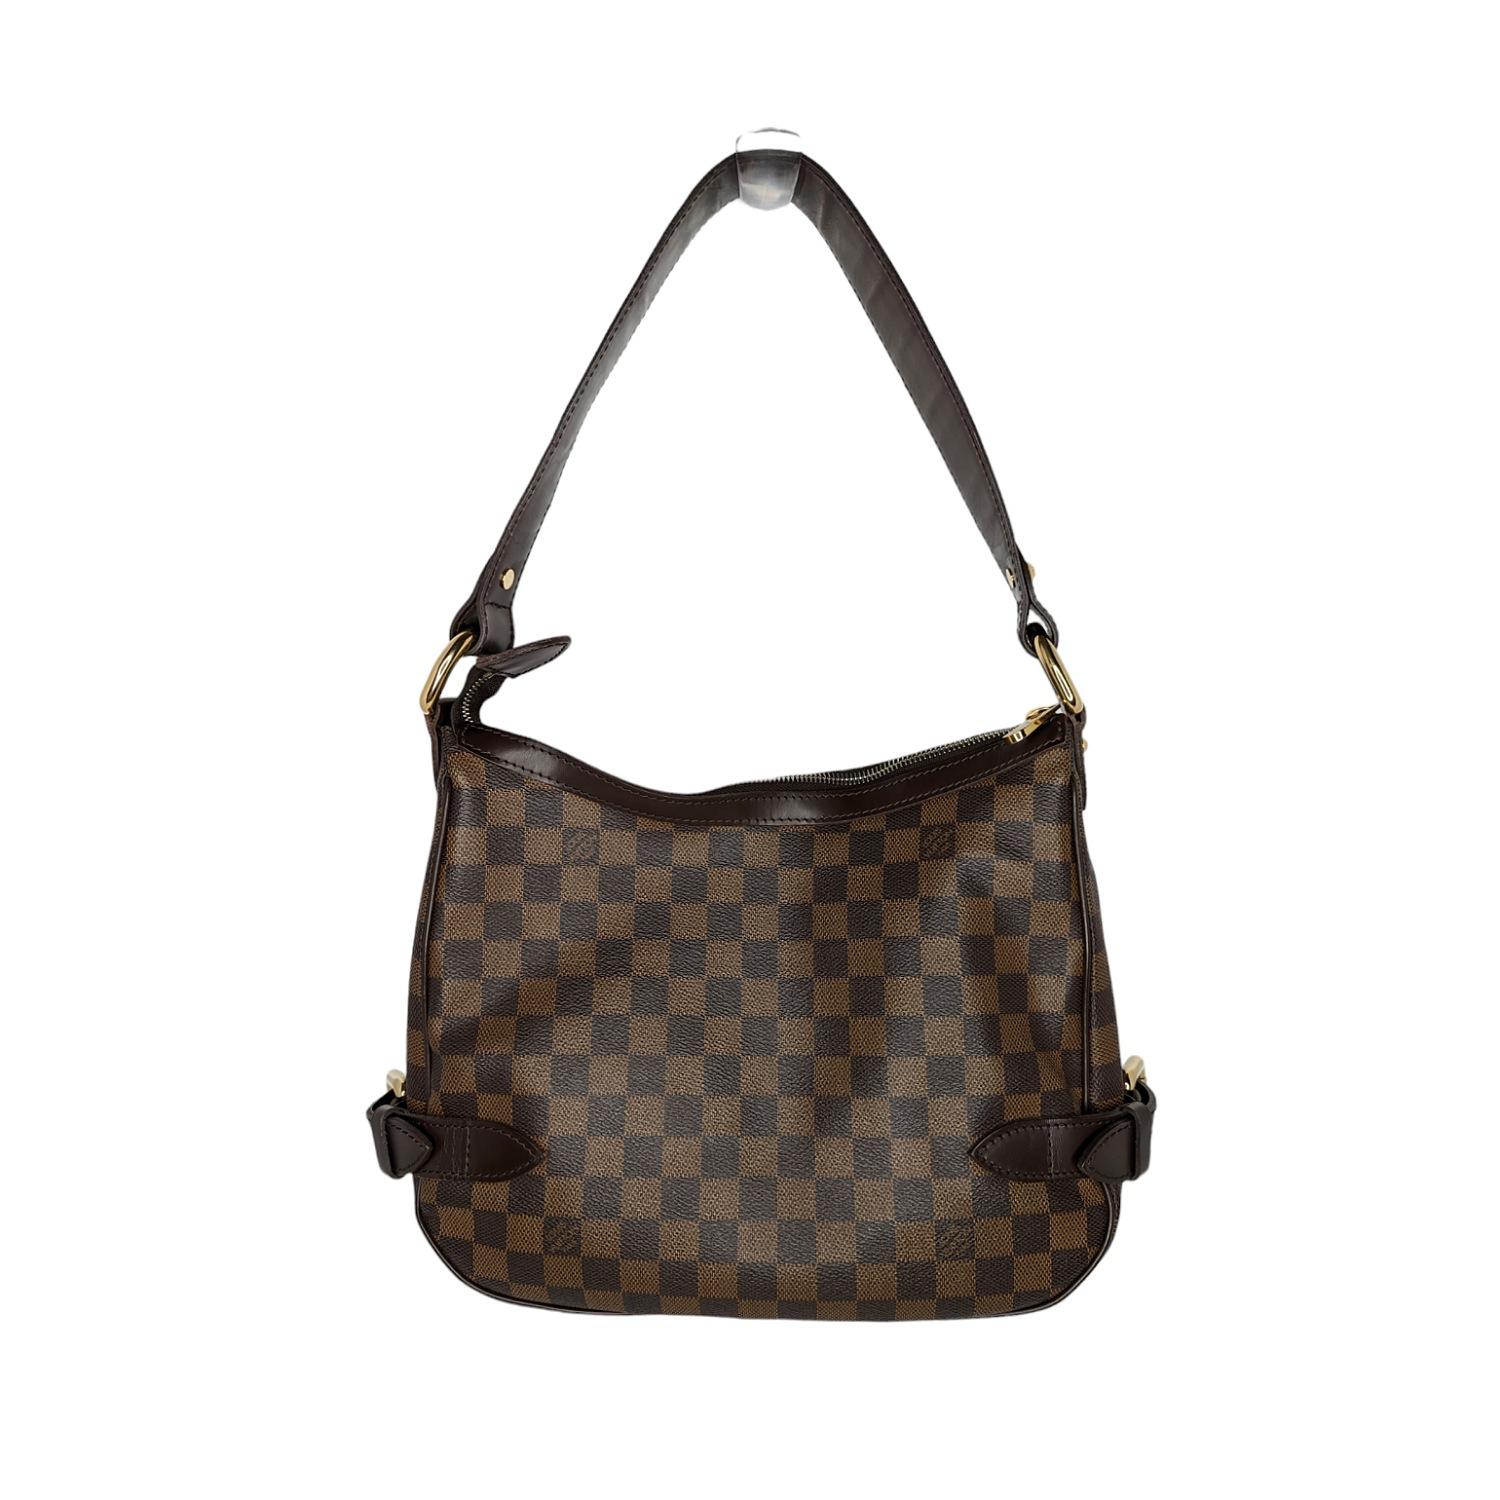 This stylish Louis Vuitton Highbury Handbag is crafted of Damier Ebene coated canvas with leather trims and golden brass hardware pieces. It has a top zipper closure. The inside has two large separate compartments, an inside patch pocket and a cell